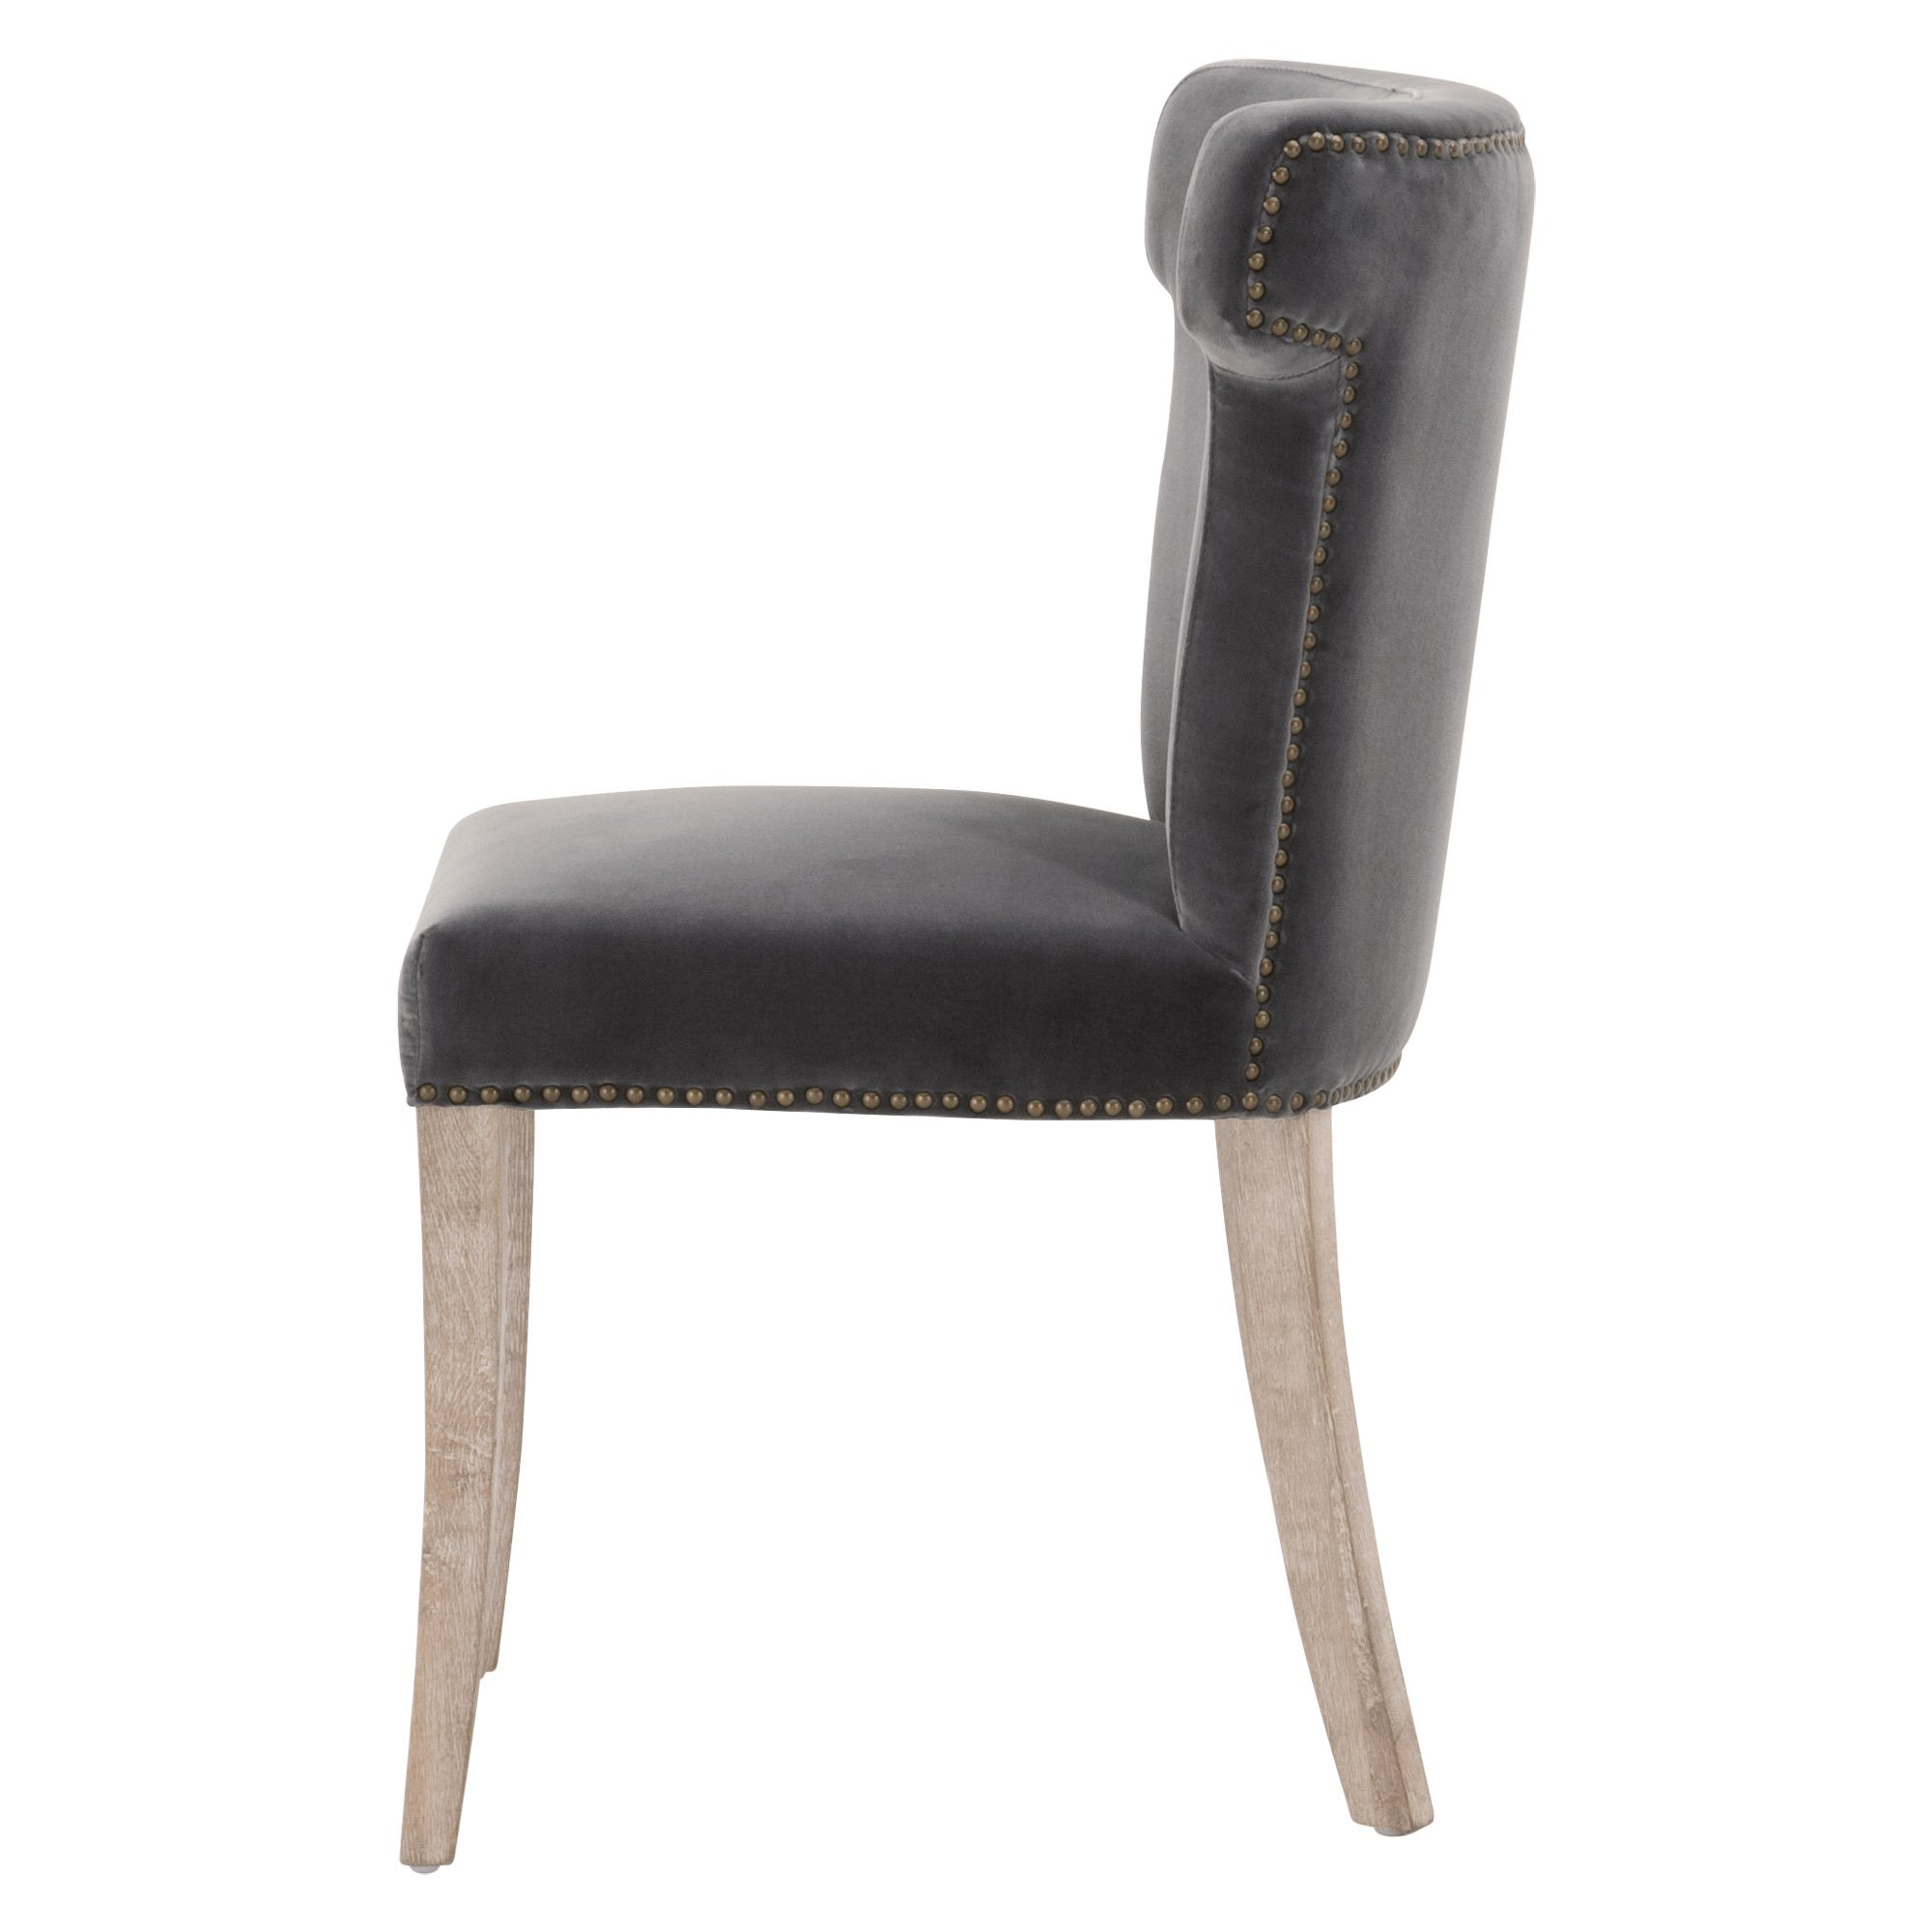 Celina Dining Chair - Image 2